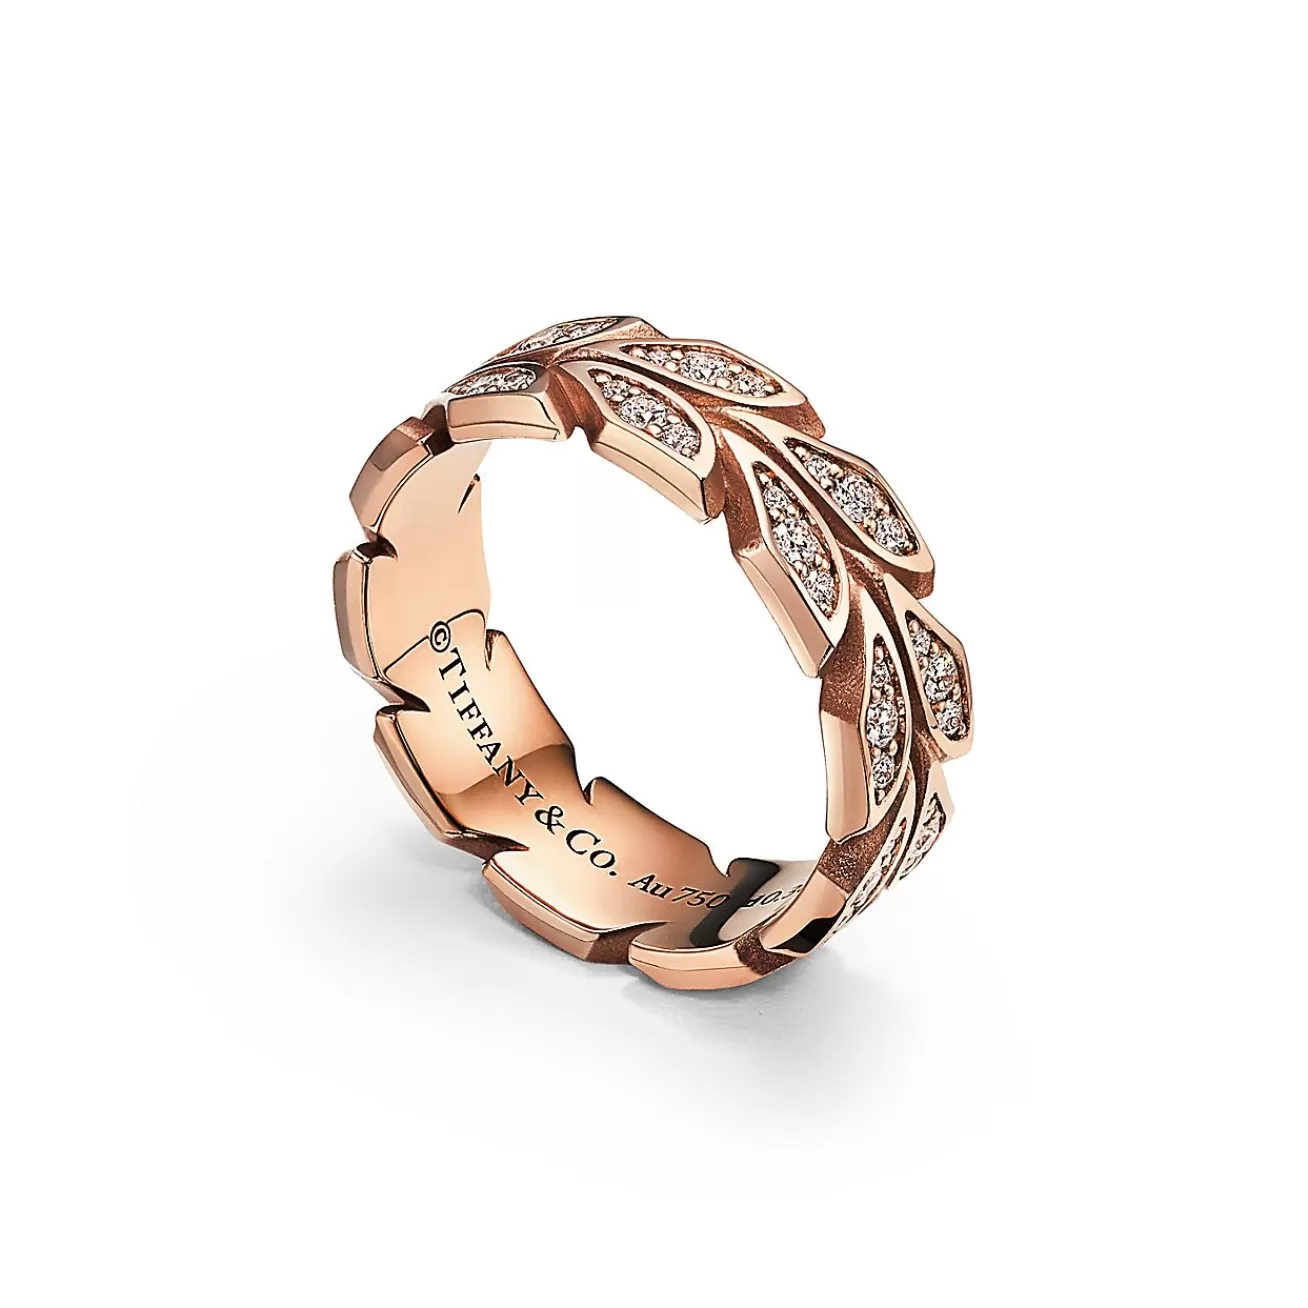 Tiffany & Co. Tiffany Victoria® Vine Band Ring in Rose Gold with Diamonds, 6 mm Wide | ^ Rings | Rose Gold Jewelry